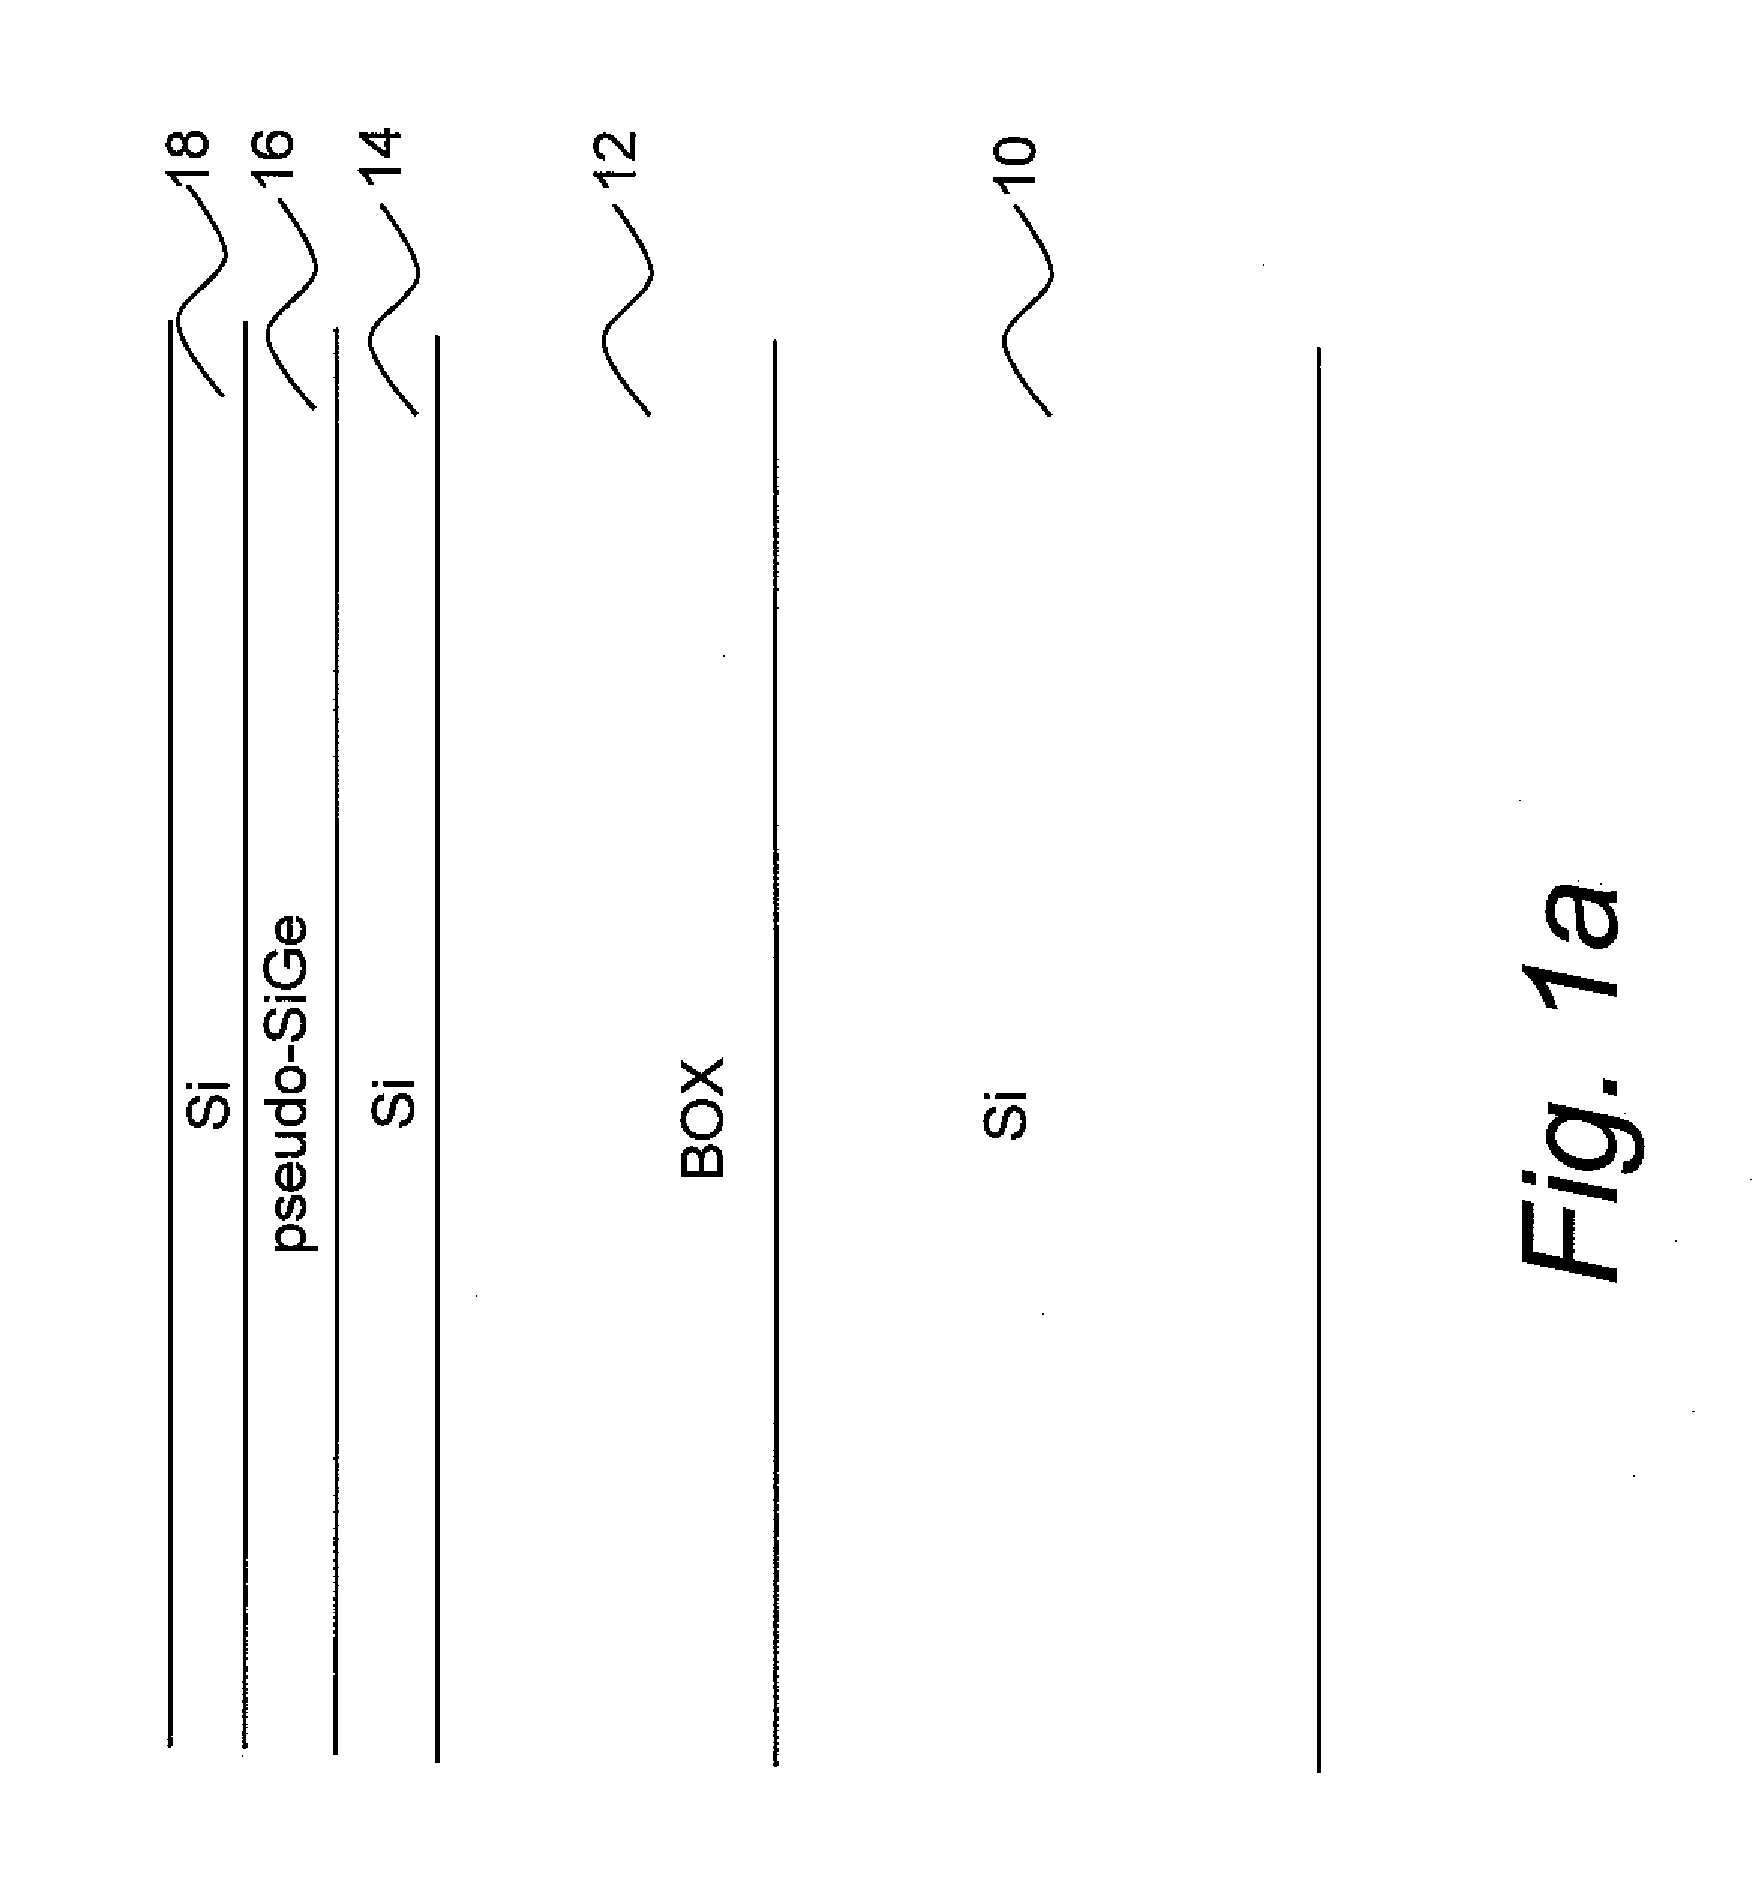 High performance stress-enhance mosfet and method of manufacture